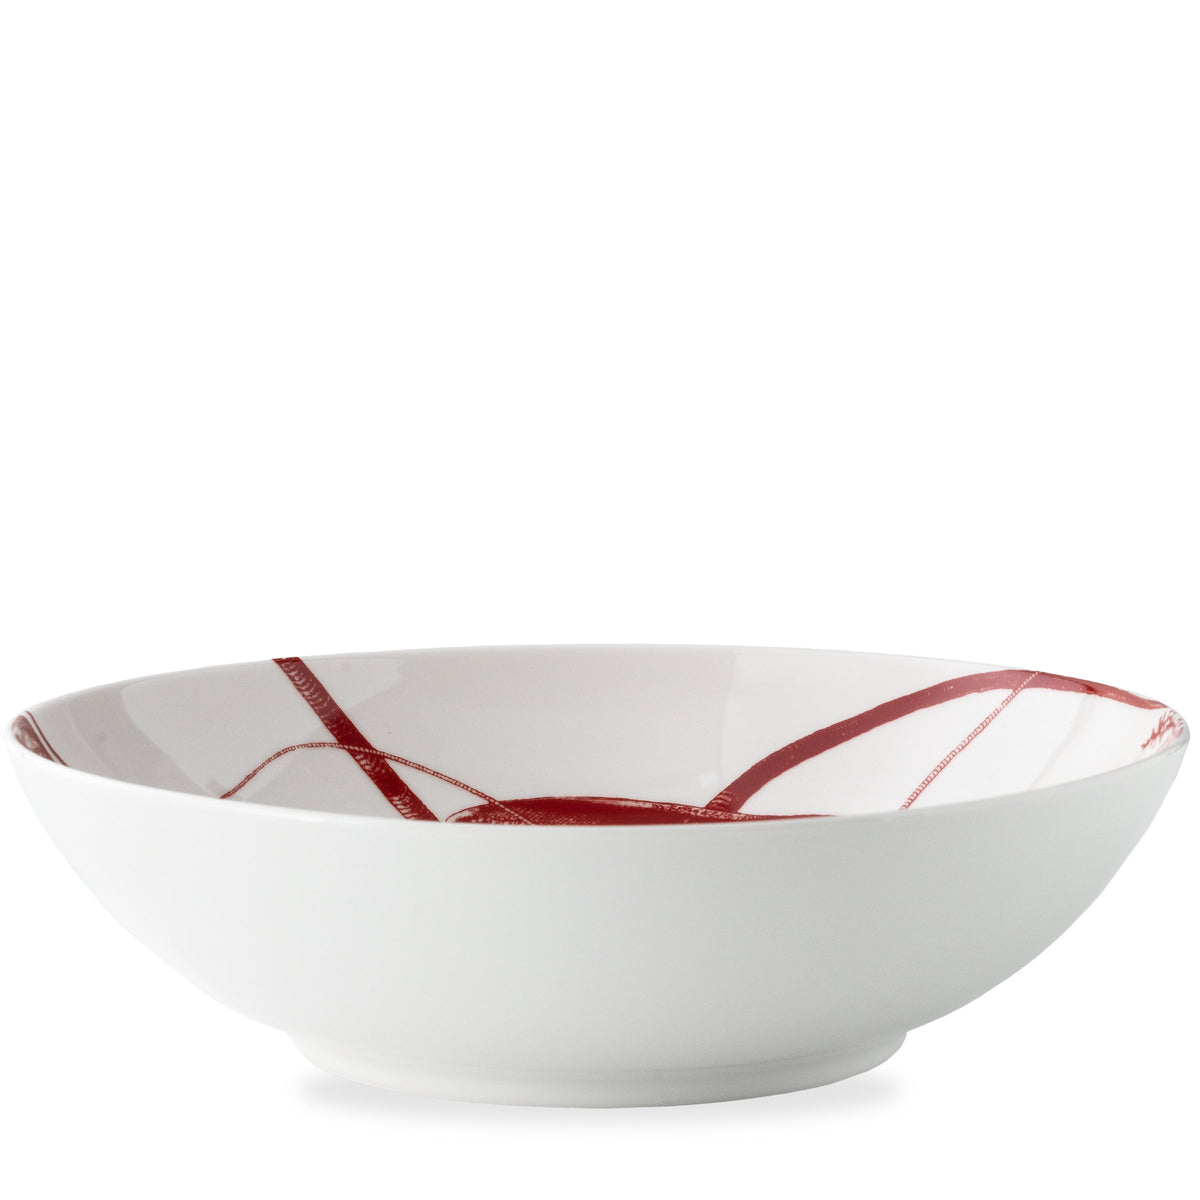 A high-fired porcelain Lobster Wide Serving Bowl by Caskata Artisanal Home with a red abstract design on its inner surface, perfect for your seaside style tableware collection.